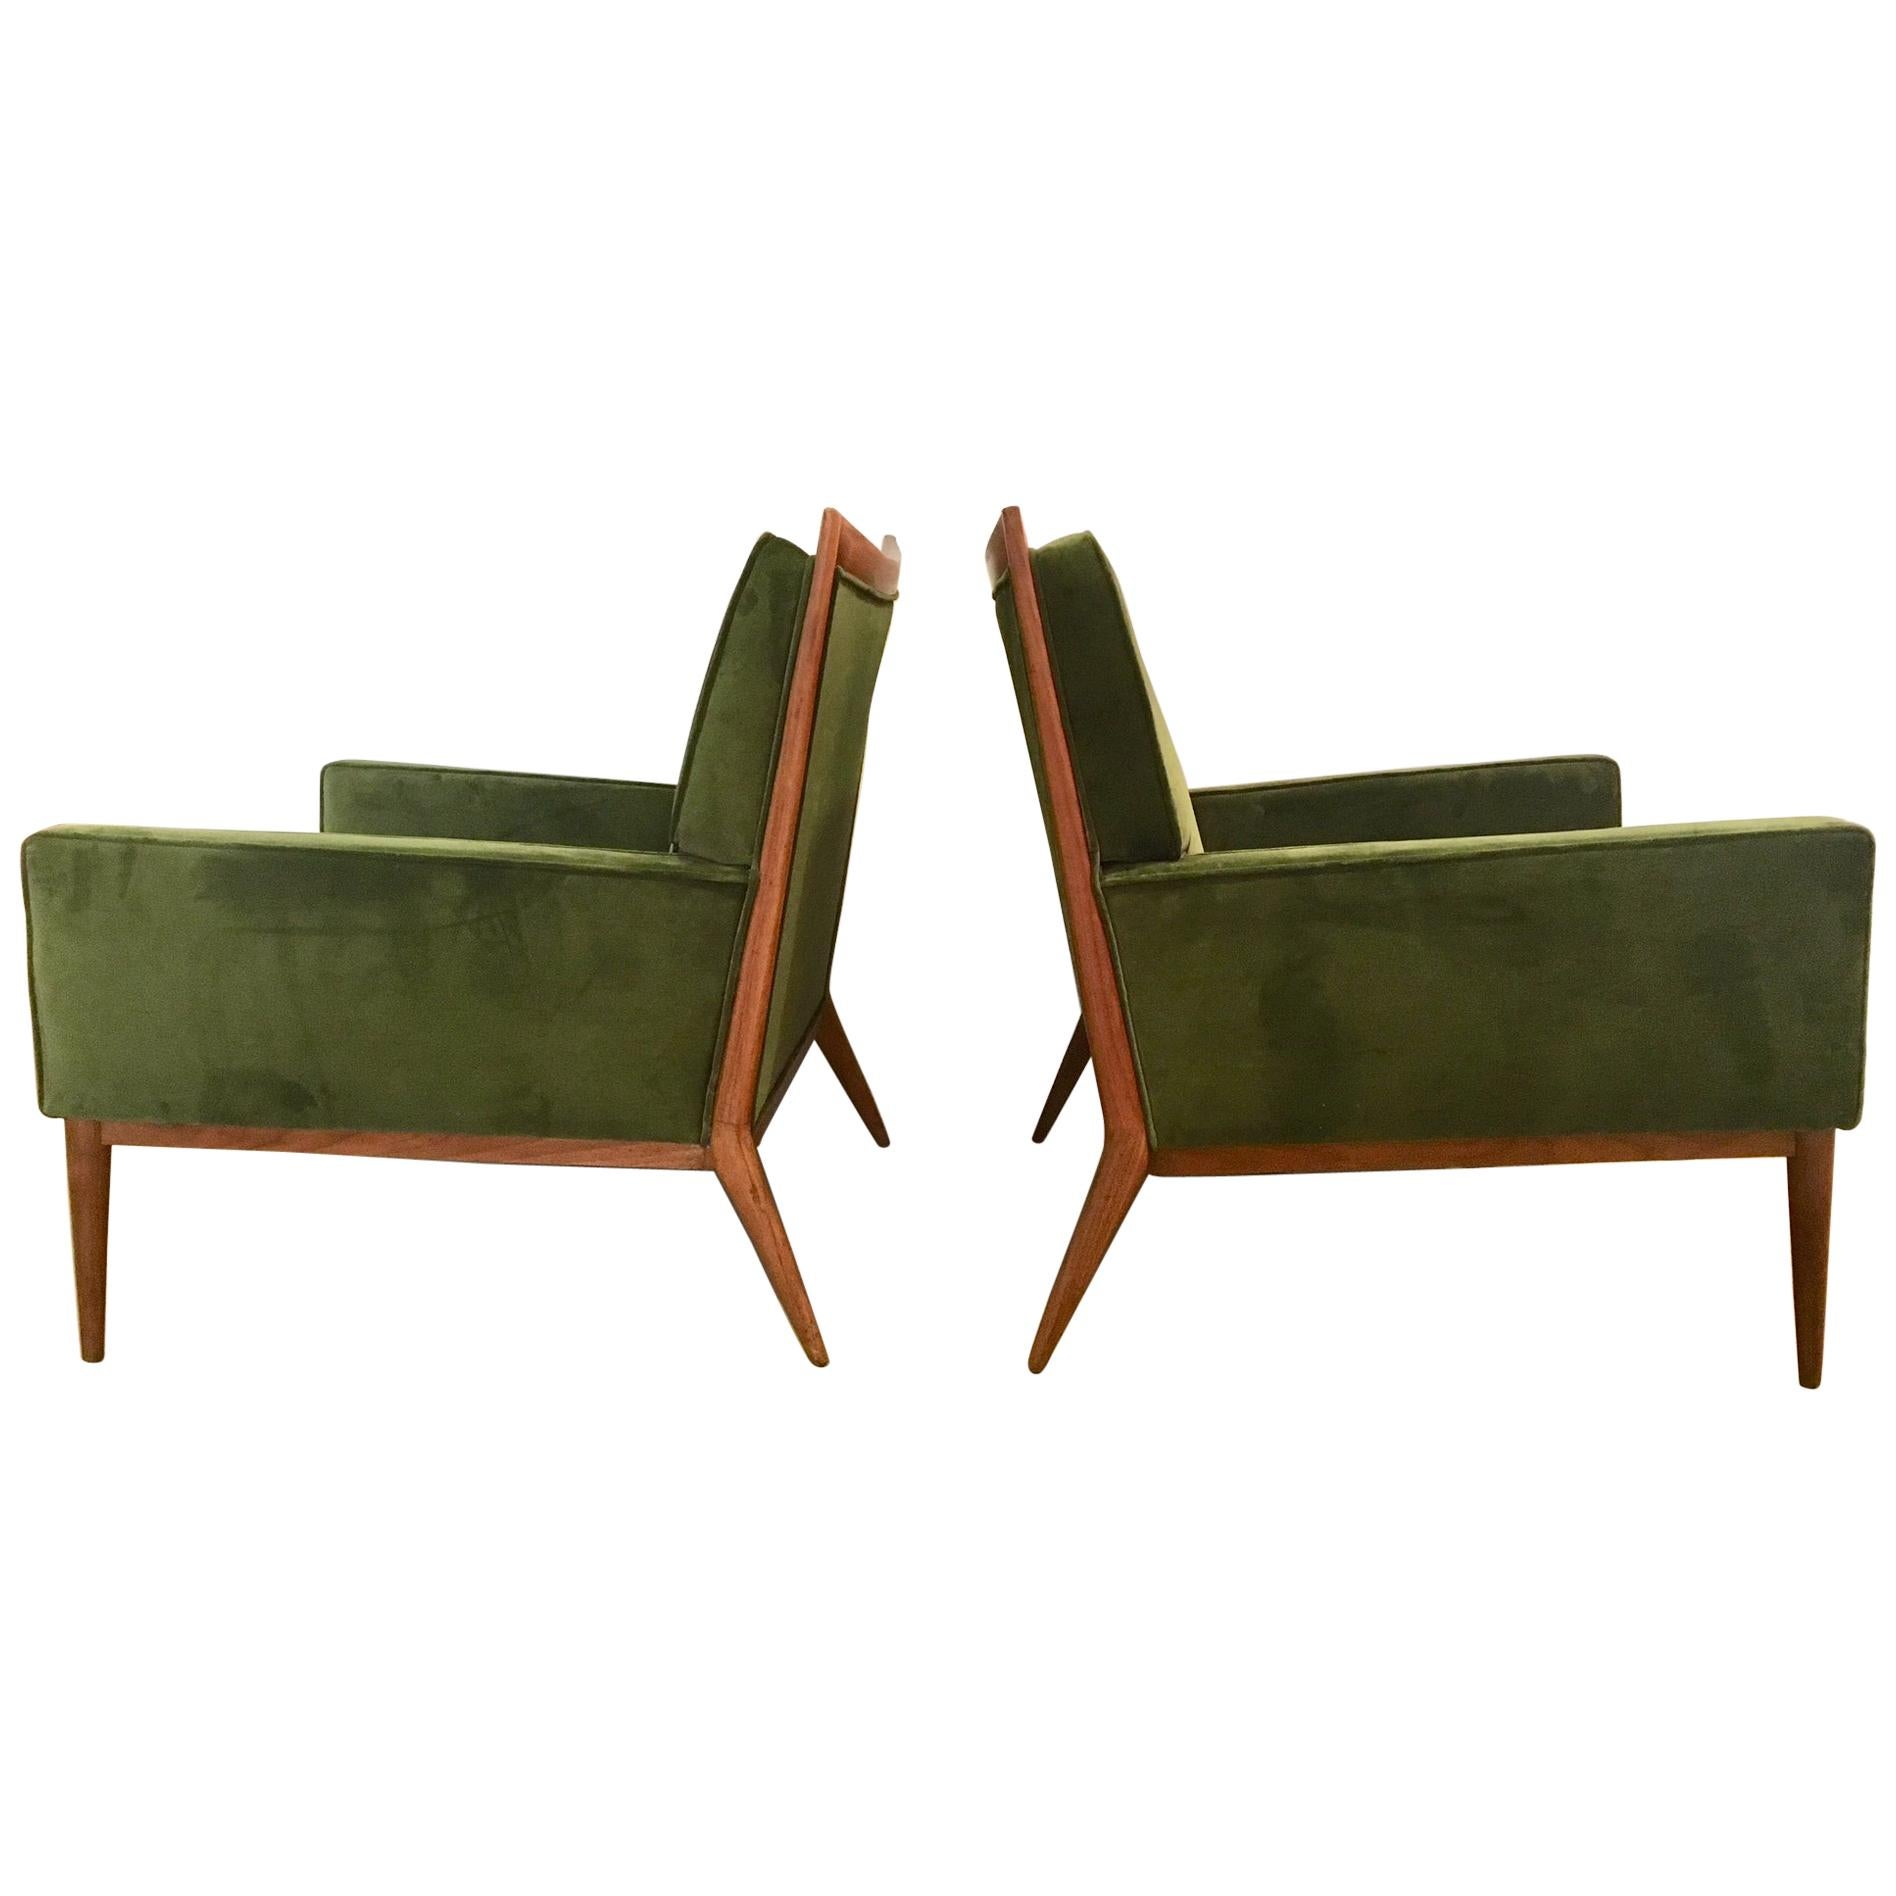 Pair of Paul McCobb Lounge Chairs for Directional, 1950s